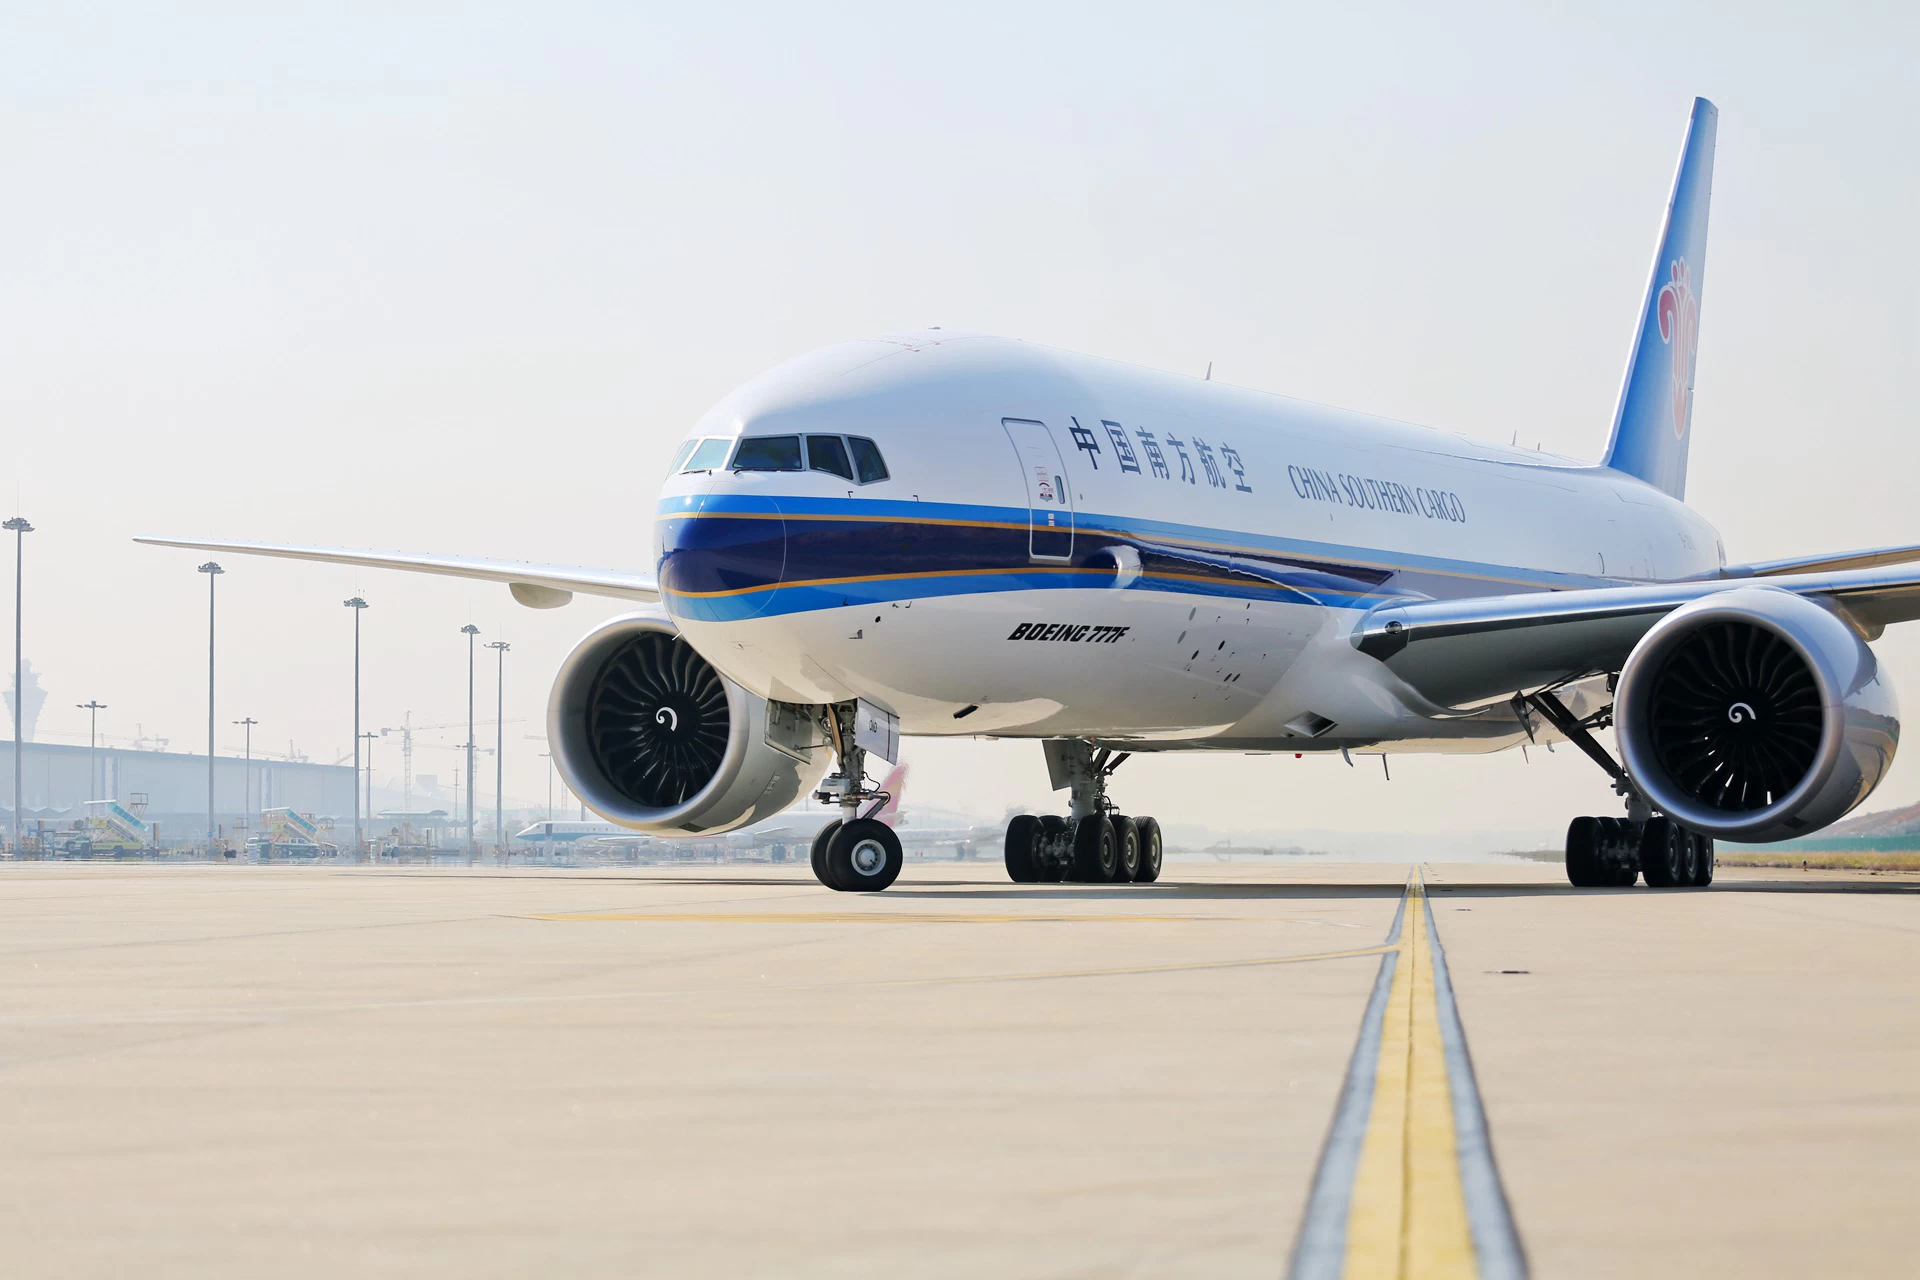 Amazon fba freight forwarder fast air shipping china to canada cheap air freight